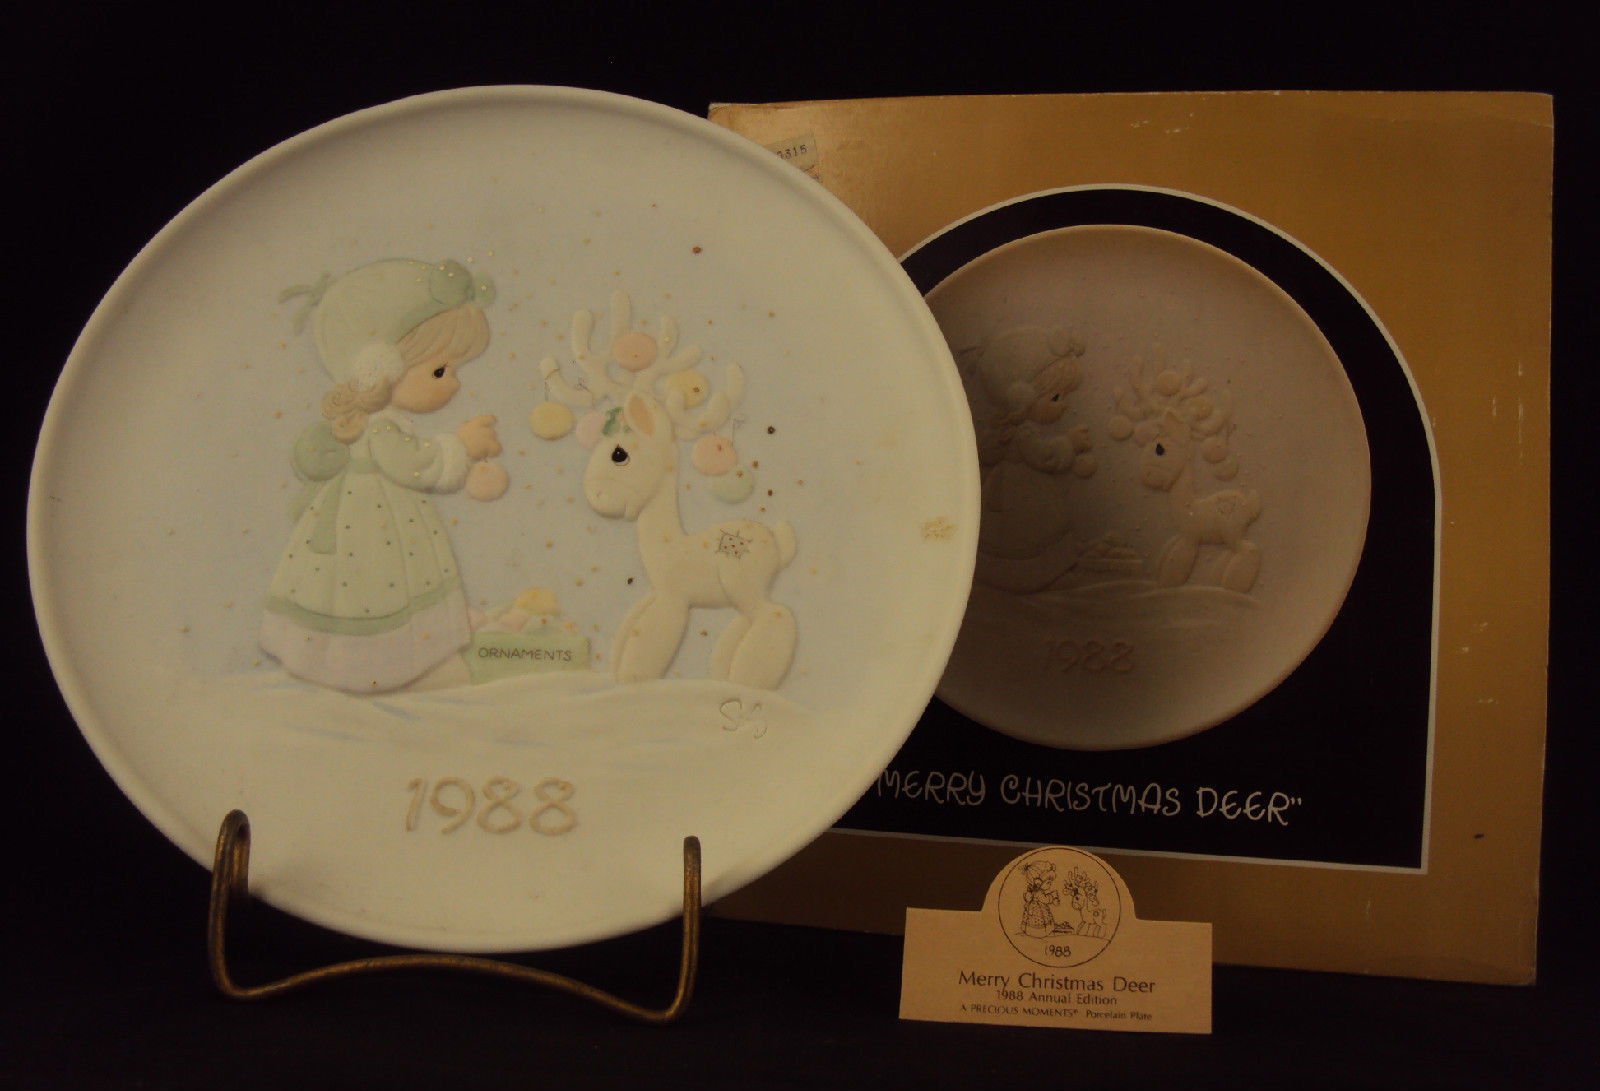 Primary image for "Merry Christmas Deer" Precious Moments PLATE, #520284, Butterfly Mark, 1988